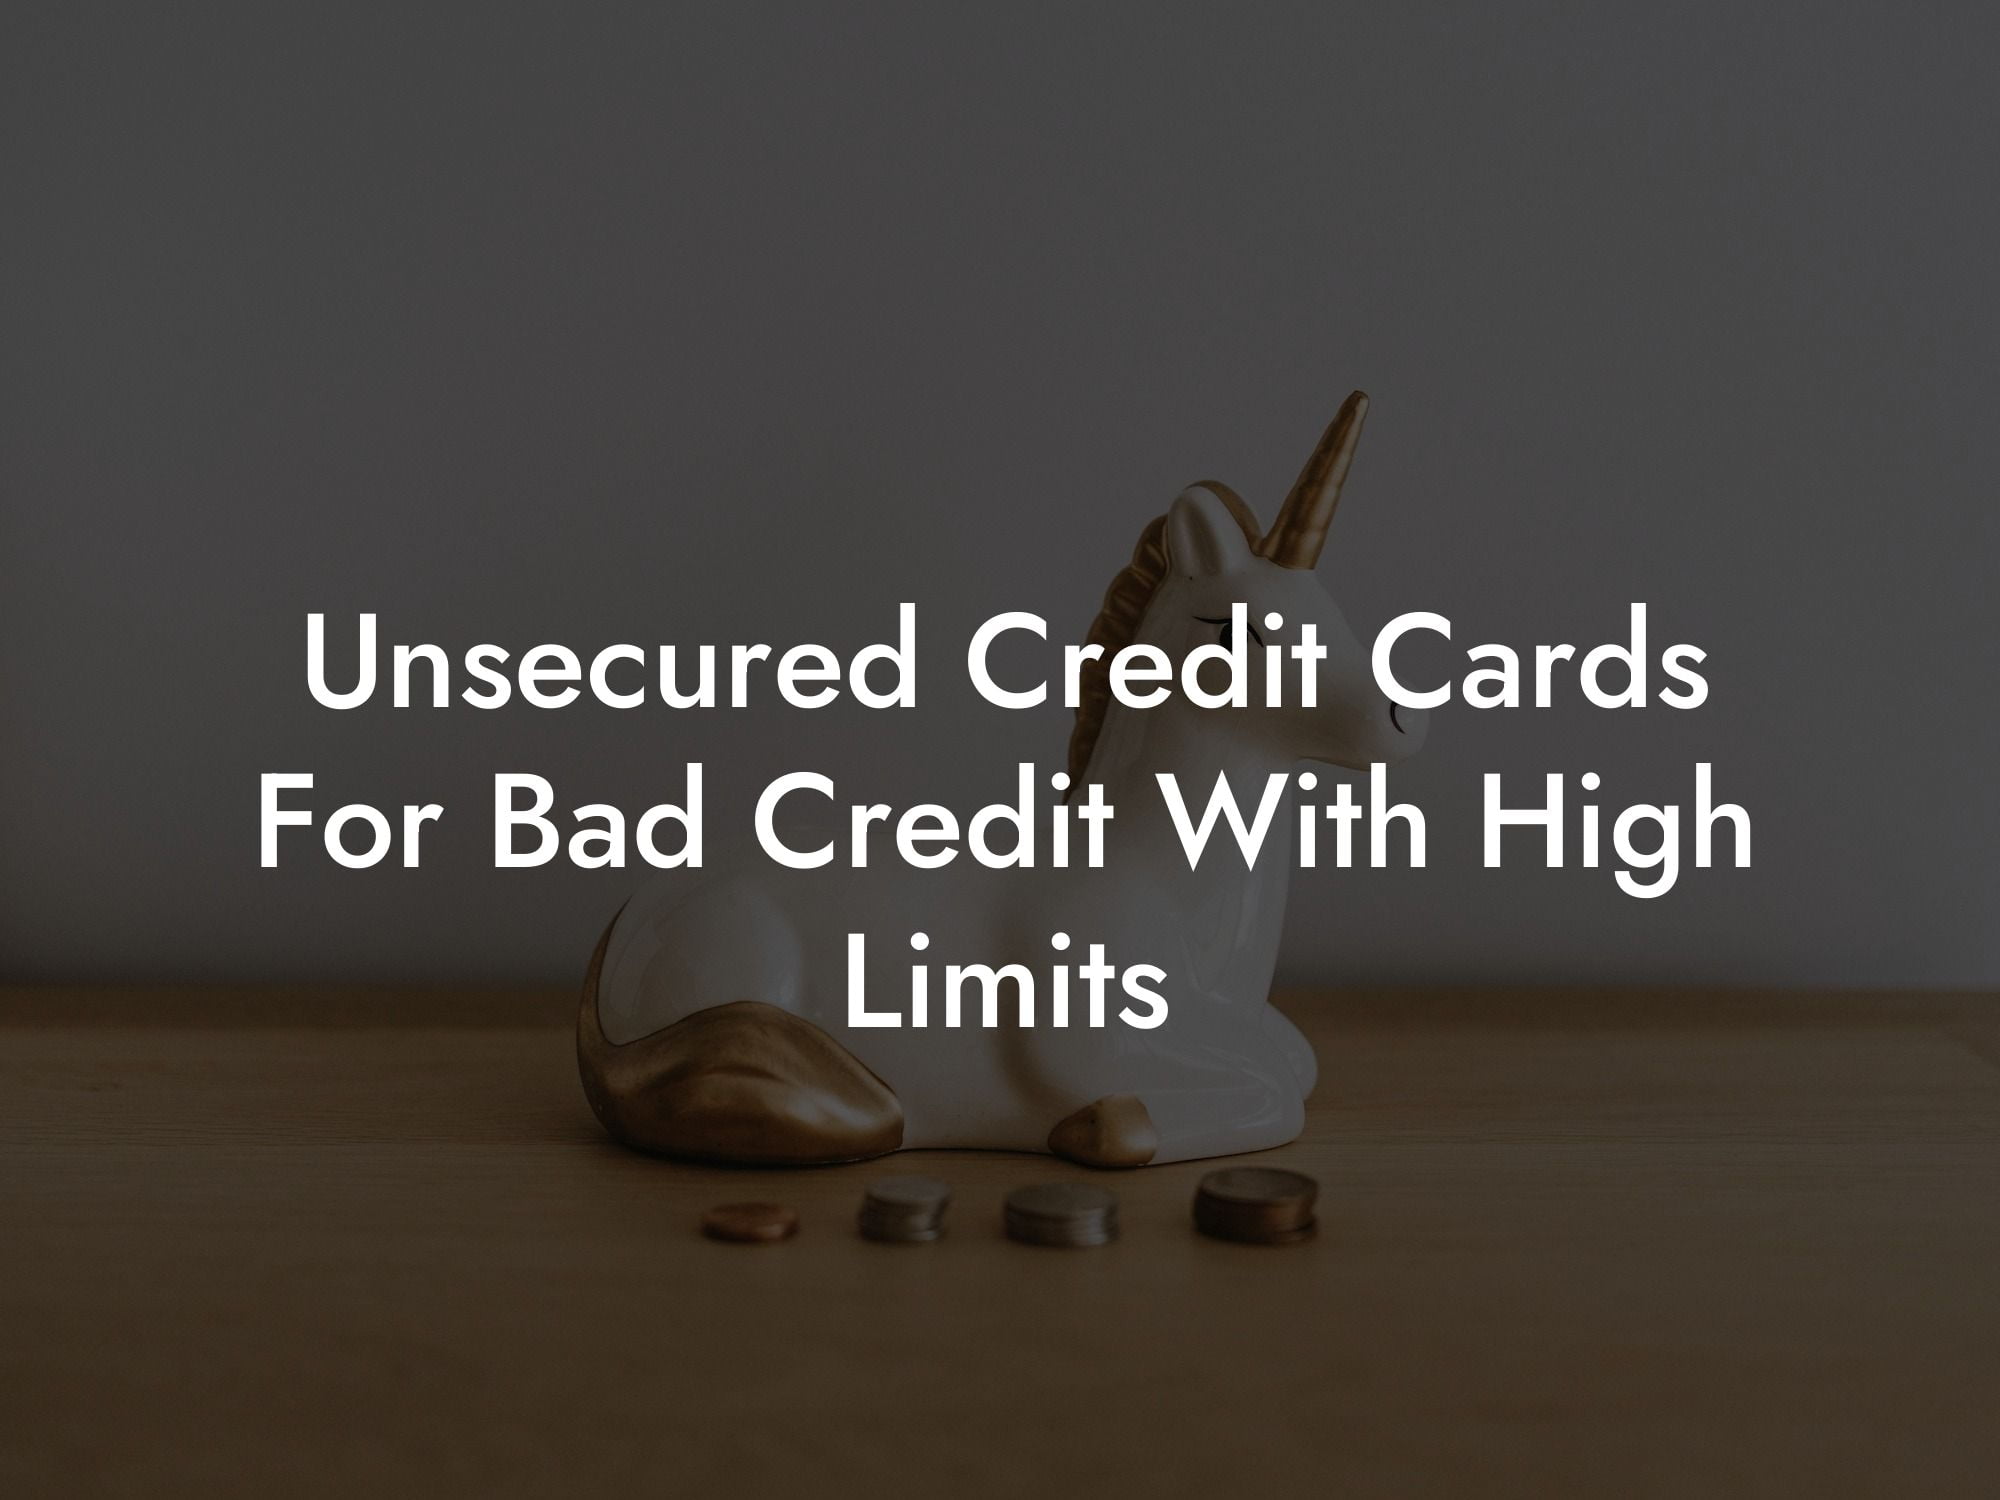 Unsecured Credit Cards For Bad Credit With High Limits